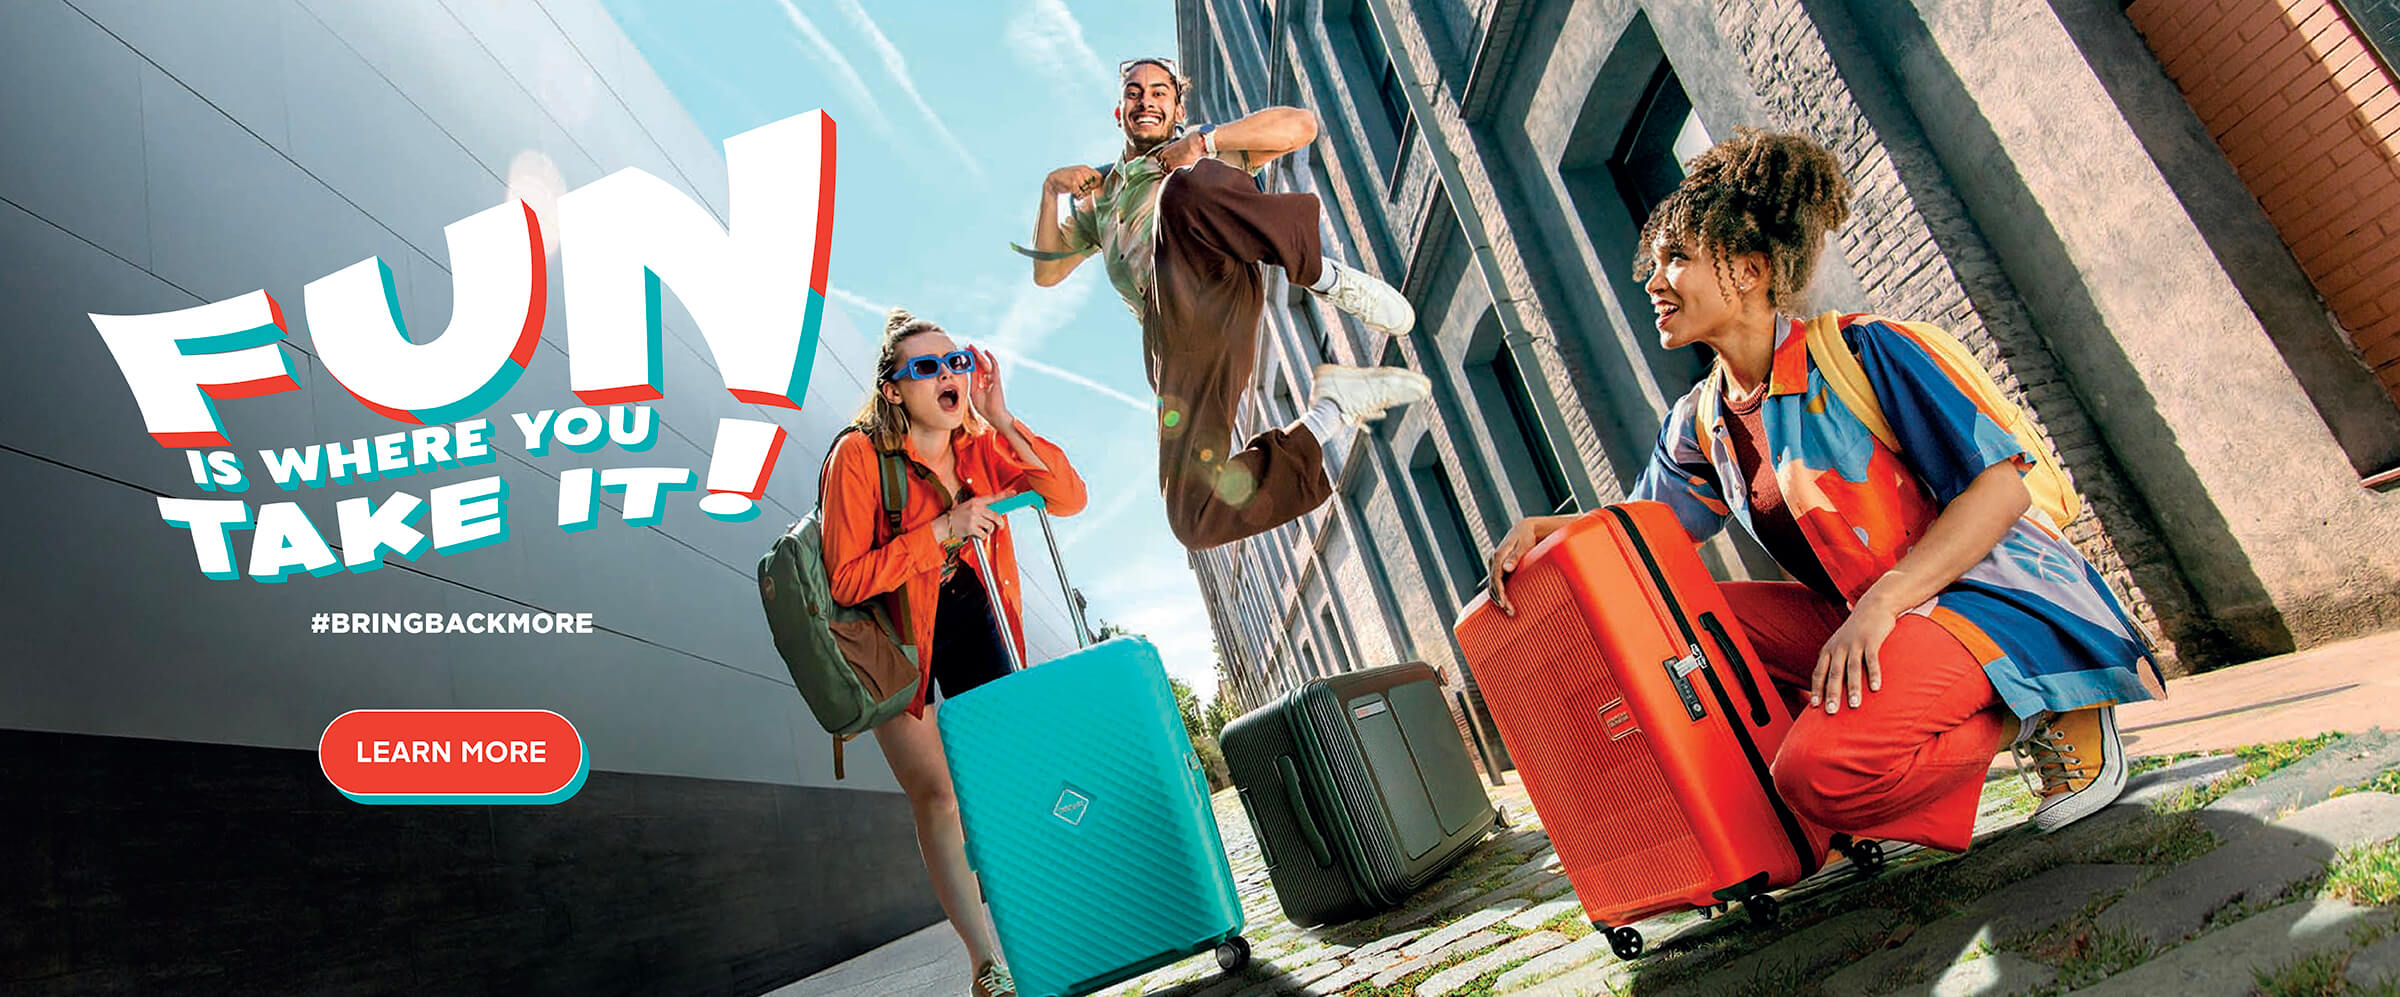 American Tourister Power Packpage Offer